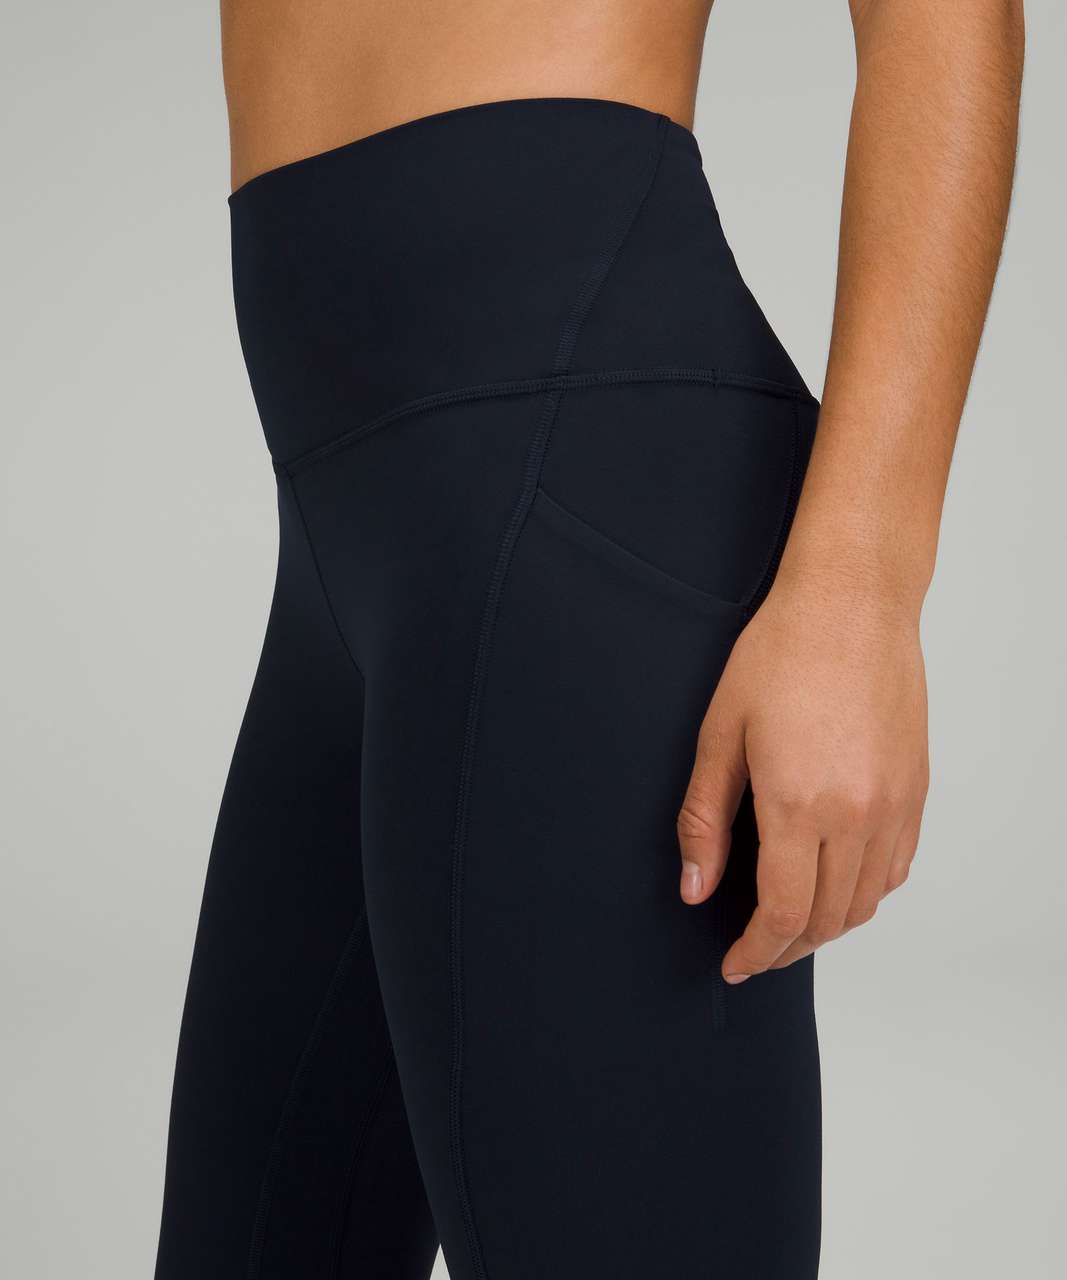 Lululemon Align High-Rise Pant with Pockets 25" - True Navy